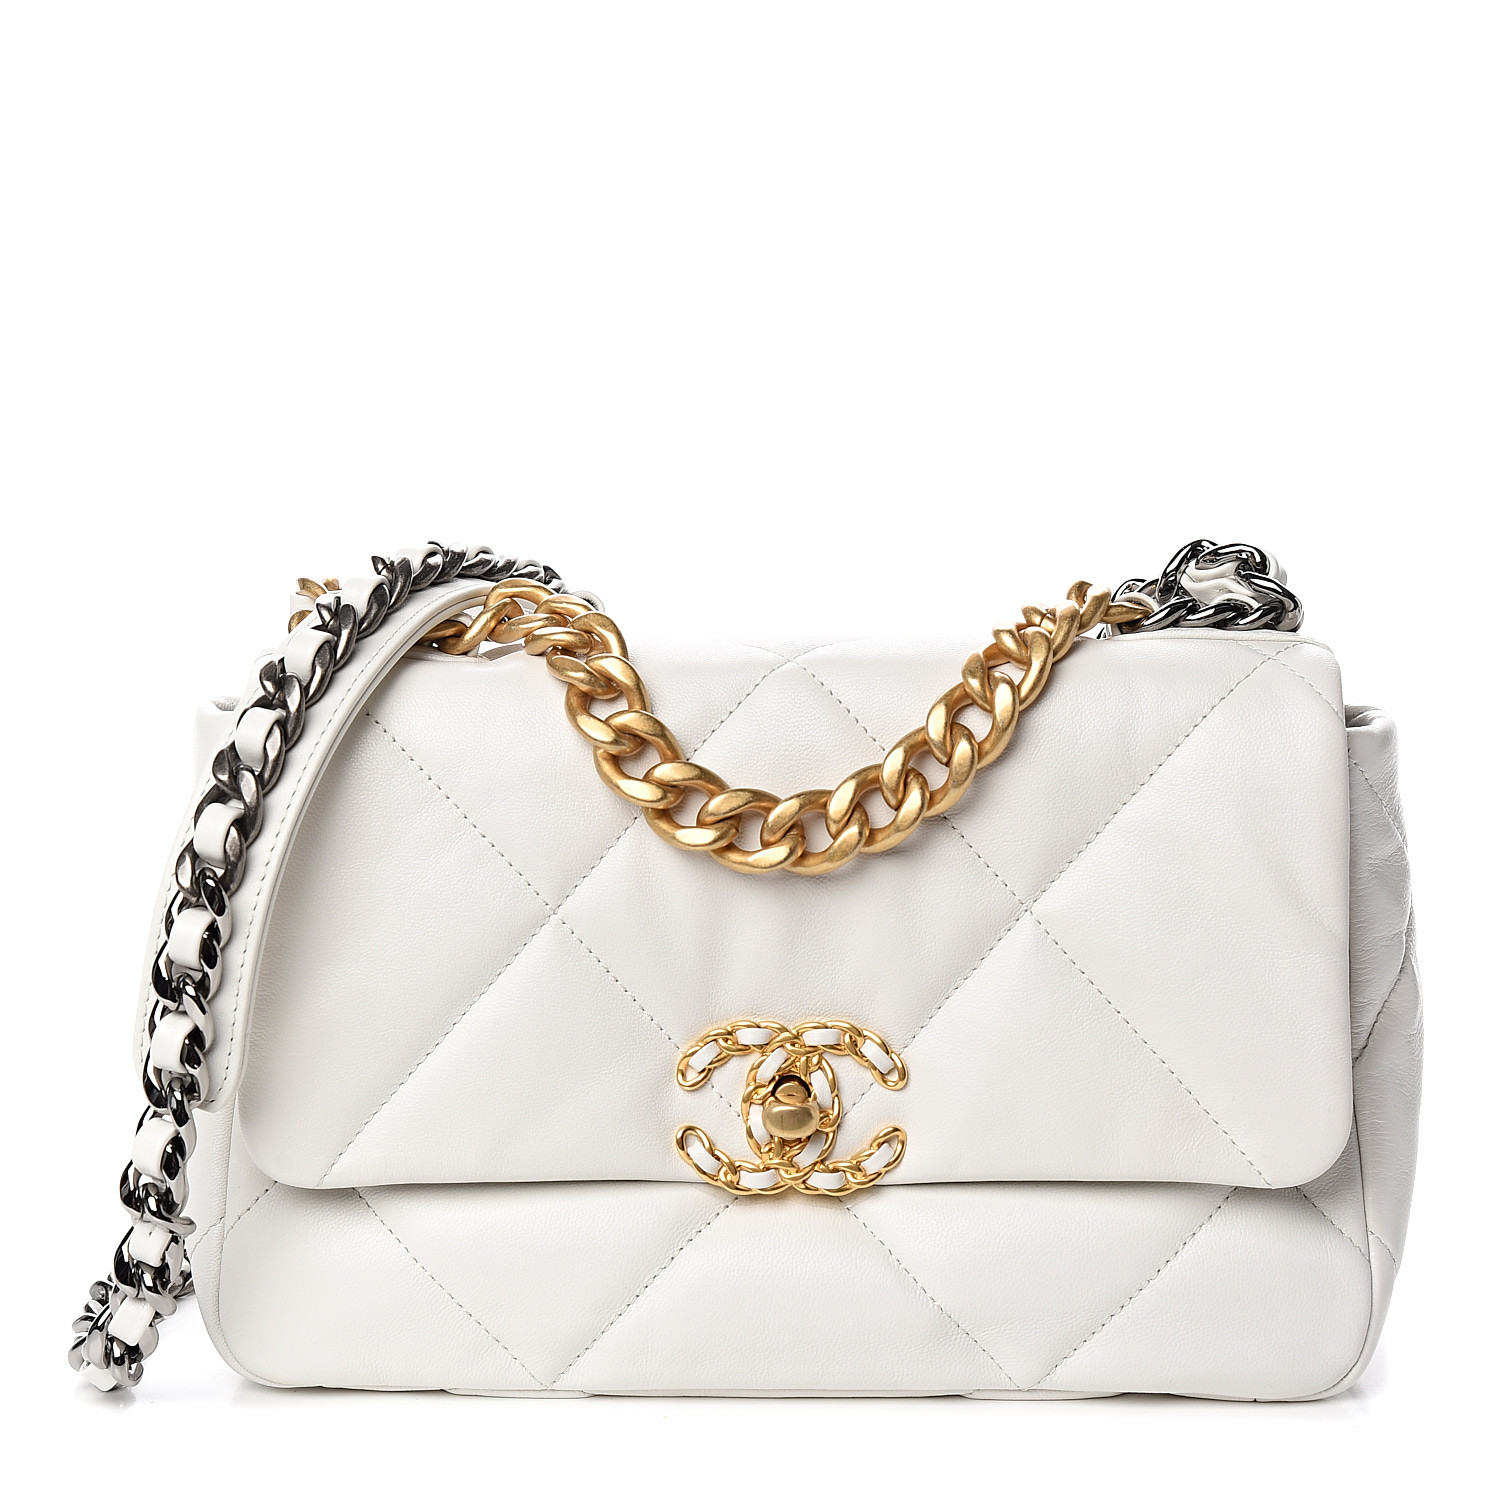 CHANEL Goatskin Quilted Medium Chanel 19 Flap White 548878